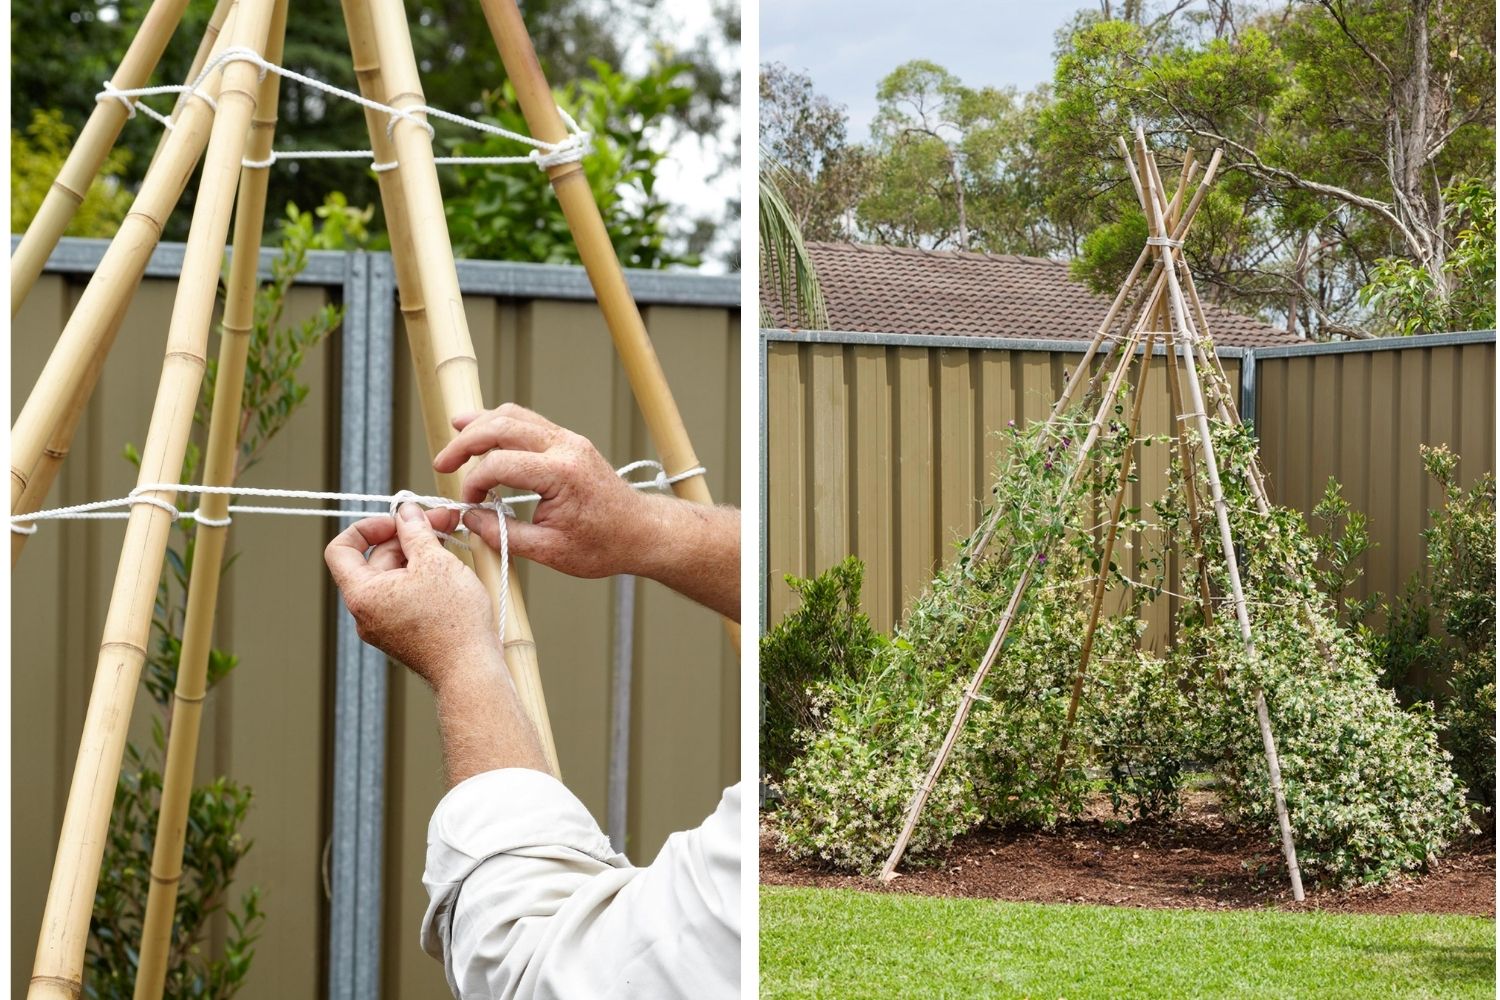 Build A Teepee Tent In The Backyard For Your Kids Better Homes And